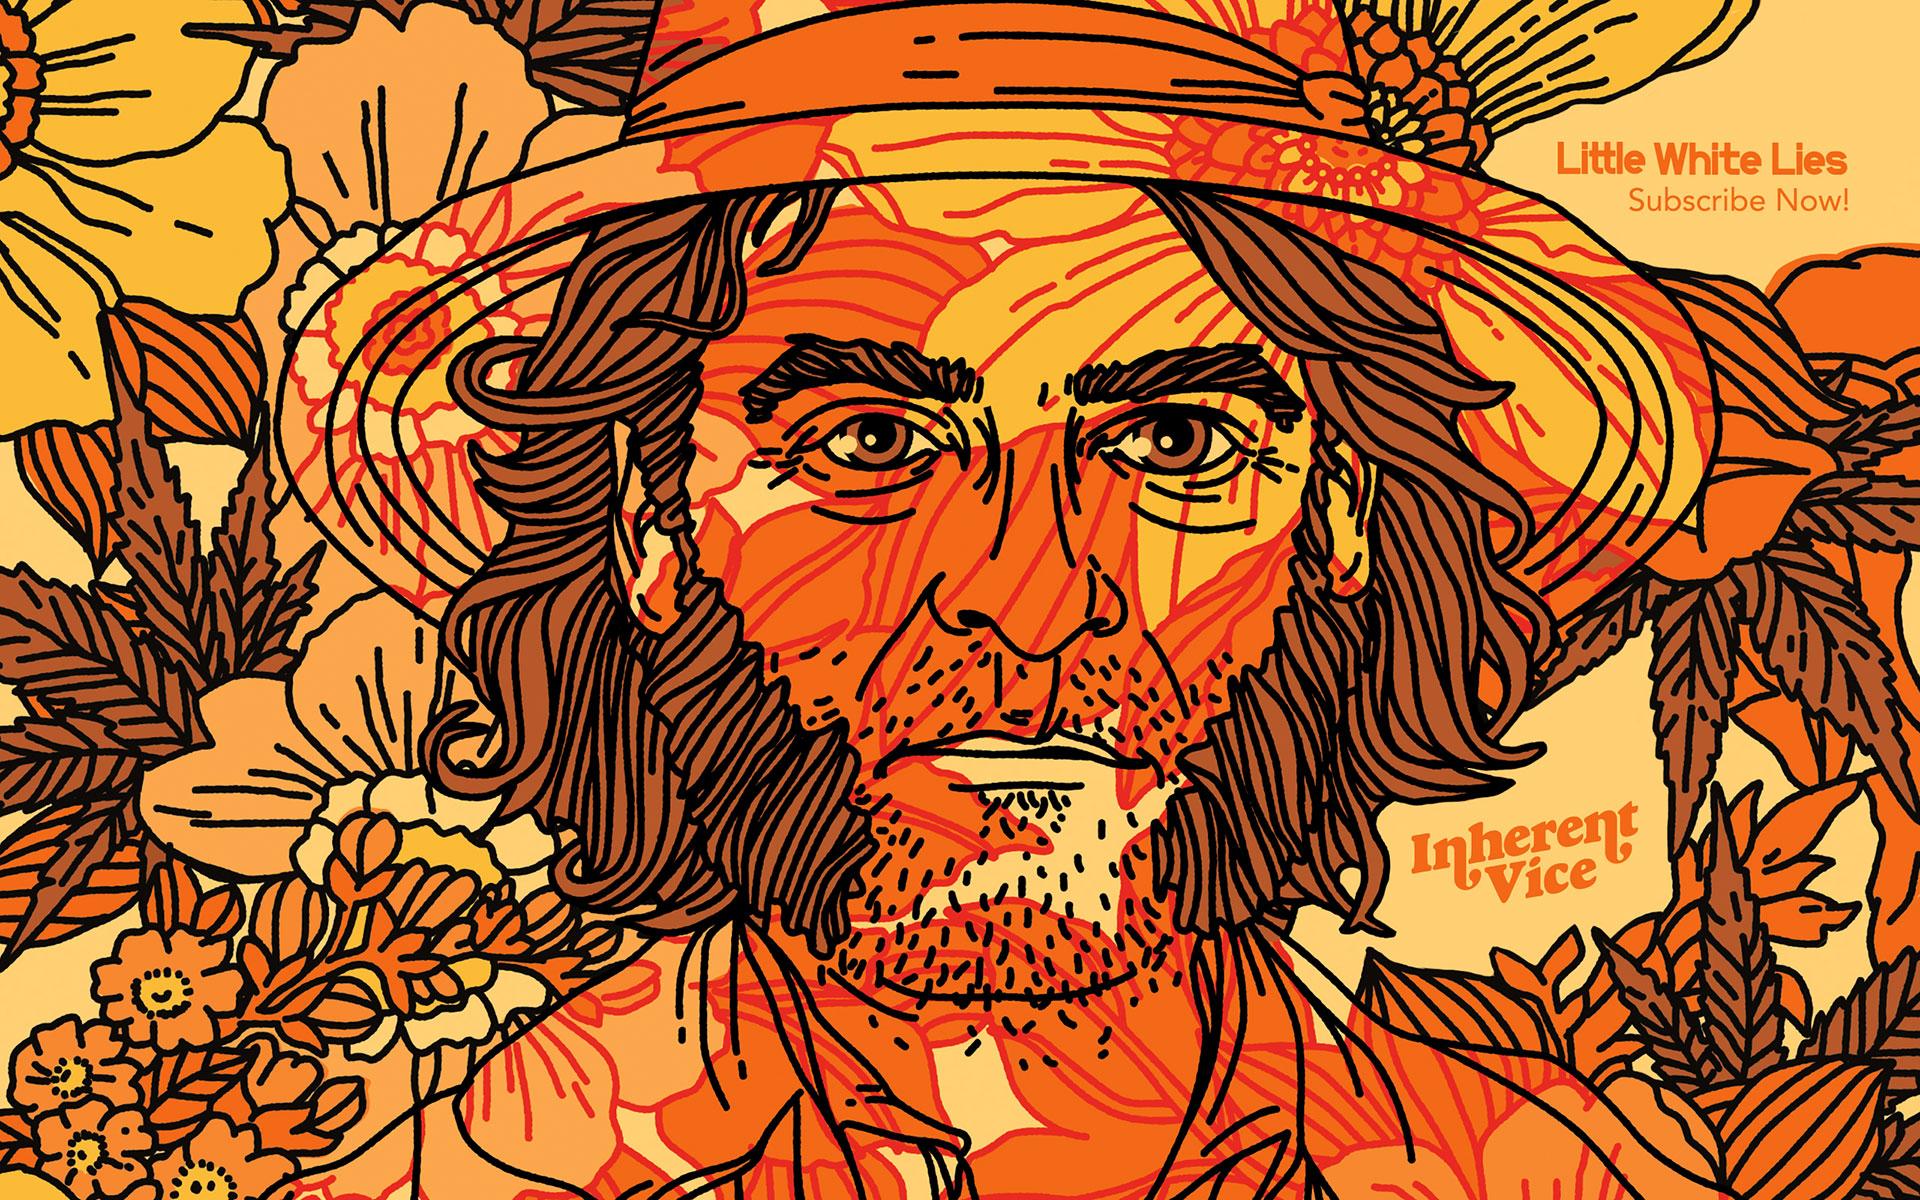 WeTransfer new issue is all about the film Inherent Vice, by director Paul Thomas Anderson